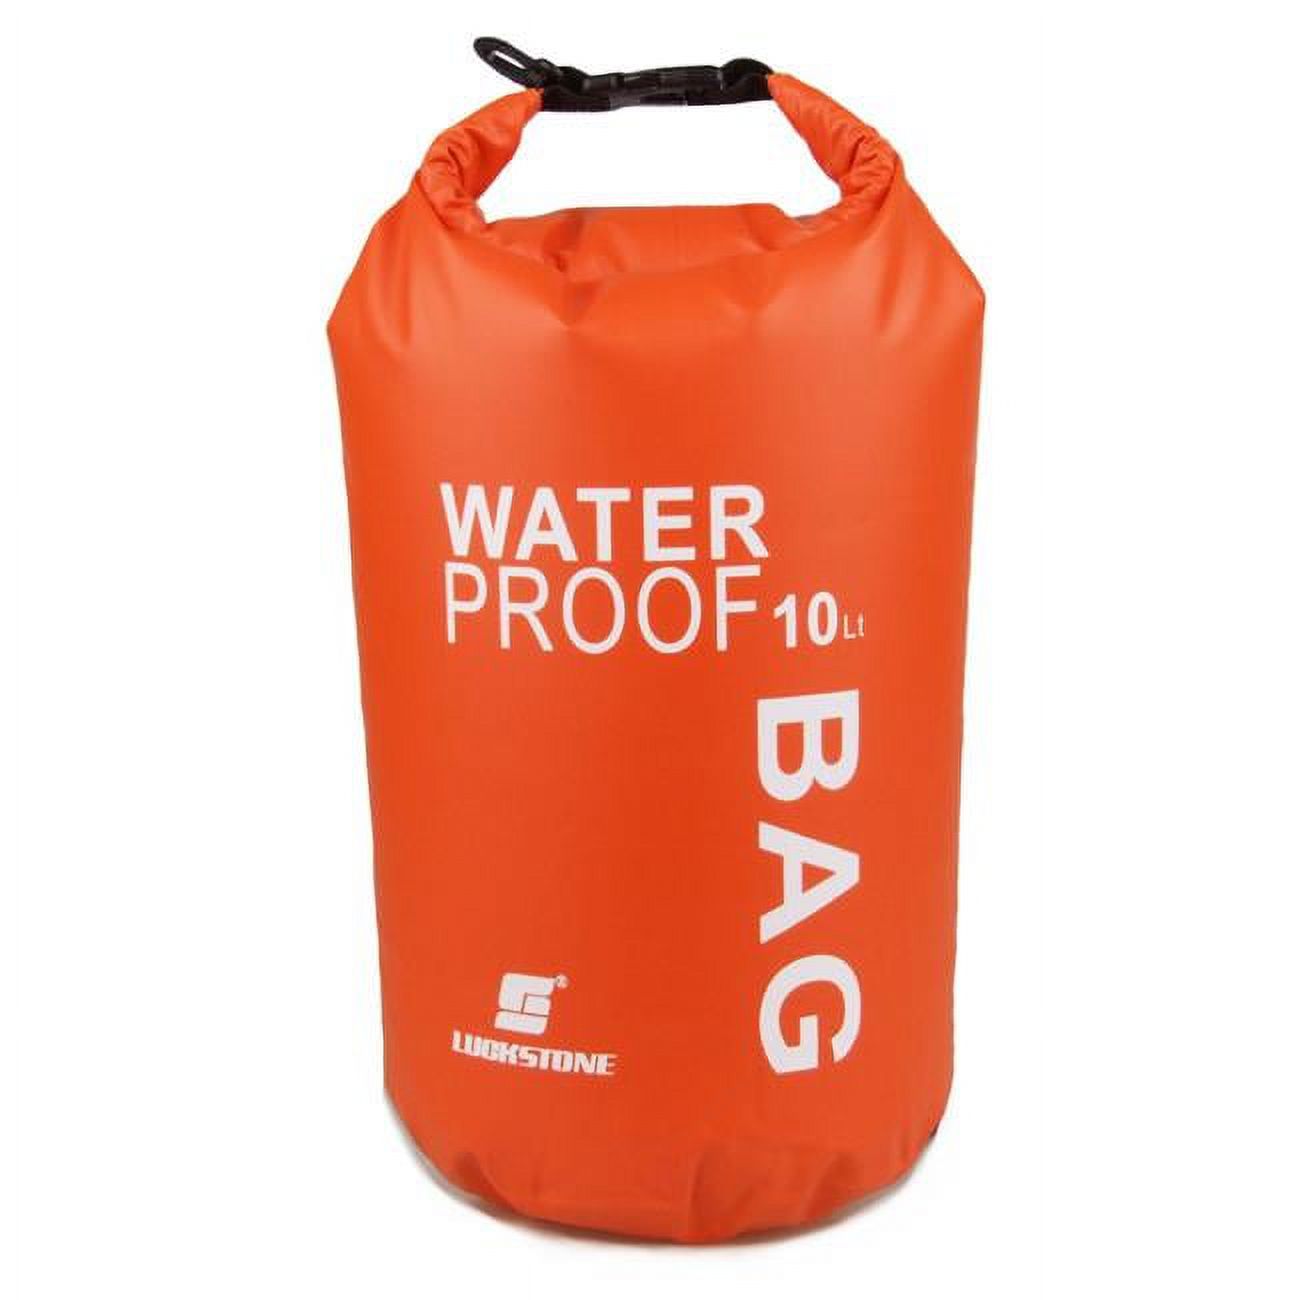 NuPouch 2496 20 Liter Water Proof Bag Orange - image 1 of 1